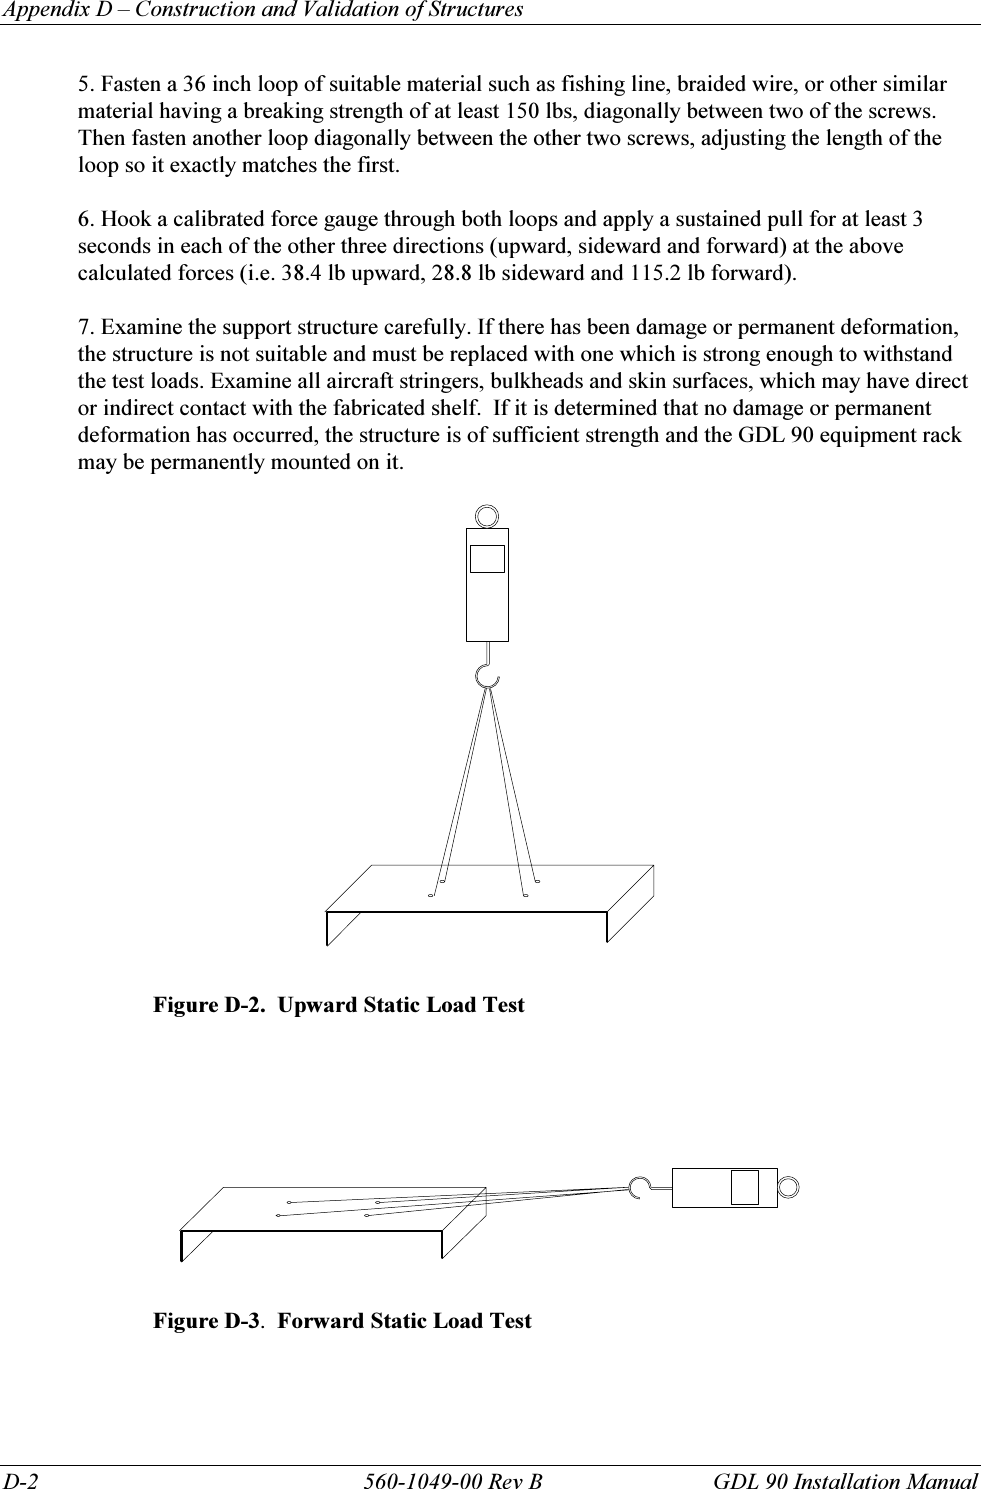 Appendix D – Construction and Validation of Structures D-2  560-1049-00 Rev B  GDL 90 Installation Manual 5. Fasten a 36 inch loop of suitable material such as fishing line, braided wire, or other similar material having a breaking strength of at least 150 lbs, diagonally between two of the screws. Then fasten another loop diagonally between the other two screws, adjusting the length of the loop so it exactly matches the first.  6. Hook a calibrated force gauge through both loops and apply a sustained pull for at least 3 seconds in each of the other three directions (upward, sideward and forward) at the above calculated forces (i.e. 38.4 lb upward, 28.8 lb sideward and 115.2 lb forward).   7. Examine the support structure carefully. If there has been damage or permanent deformation, the structure is not suitable and must be replaced with one which is strong enough to withstand the test loads. Examine all aircraft stringers, bulkheads and skin surfaces, which may have direct or indirect contact with the fabricated shelf.  If it is determined that no damage or permanent deformation has occurred, the structure is of sufficient strength and the GDL 90 equipment rack may be permanently mounted on it.    Figure D-2.  Upward Static Load Test        Figure D-3.  Forward Static Load Test  